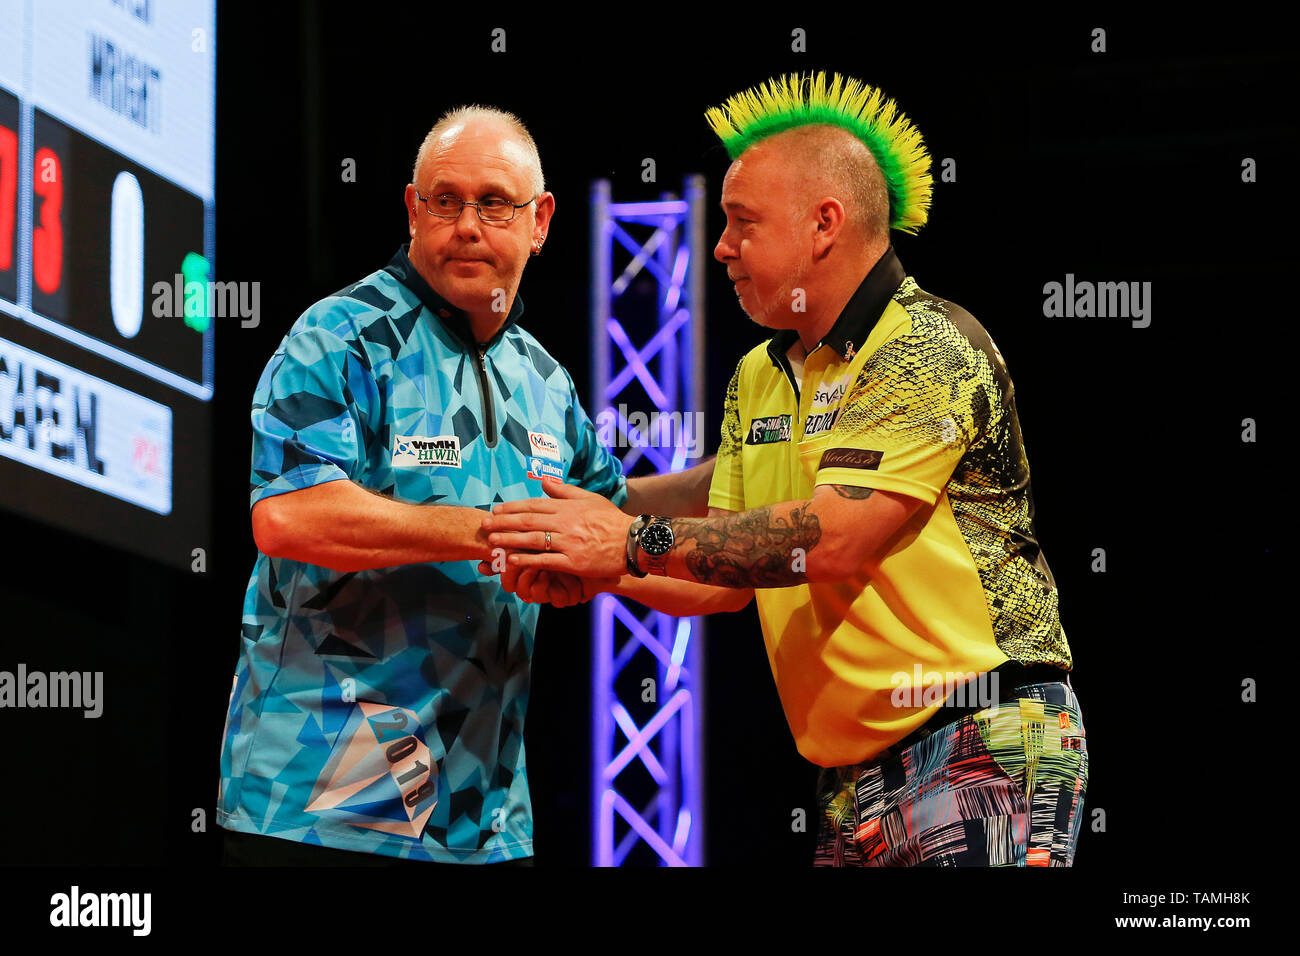 Zwolle, Netherlands. 26th May, 2019. ZWOLLE, 26Ð05-2019, IJsselhallen, PDC  Dutch Darts Masters, Ian White and Peter Wright Credit: Pro Shots/Alamy  Live News Stock Photo - Alamy